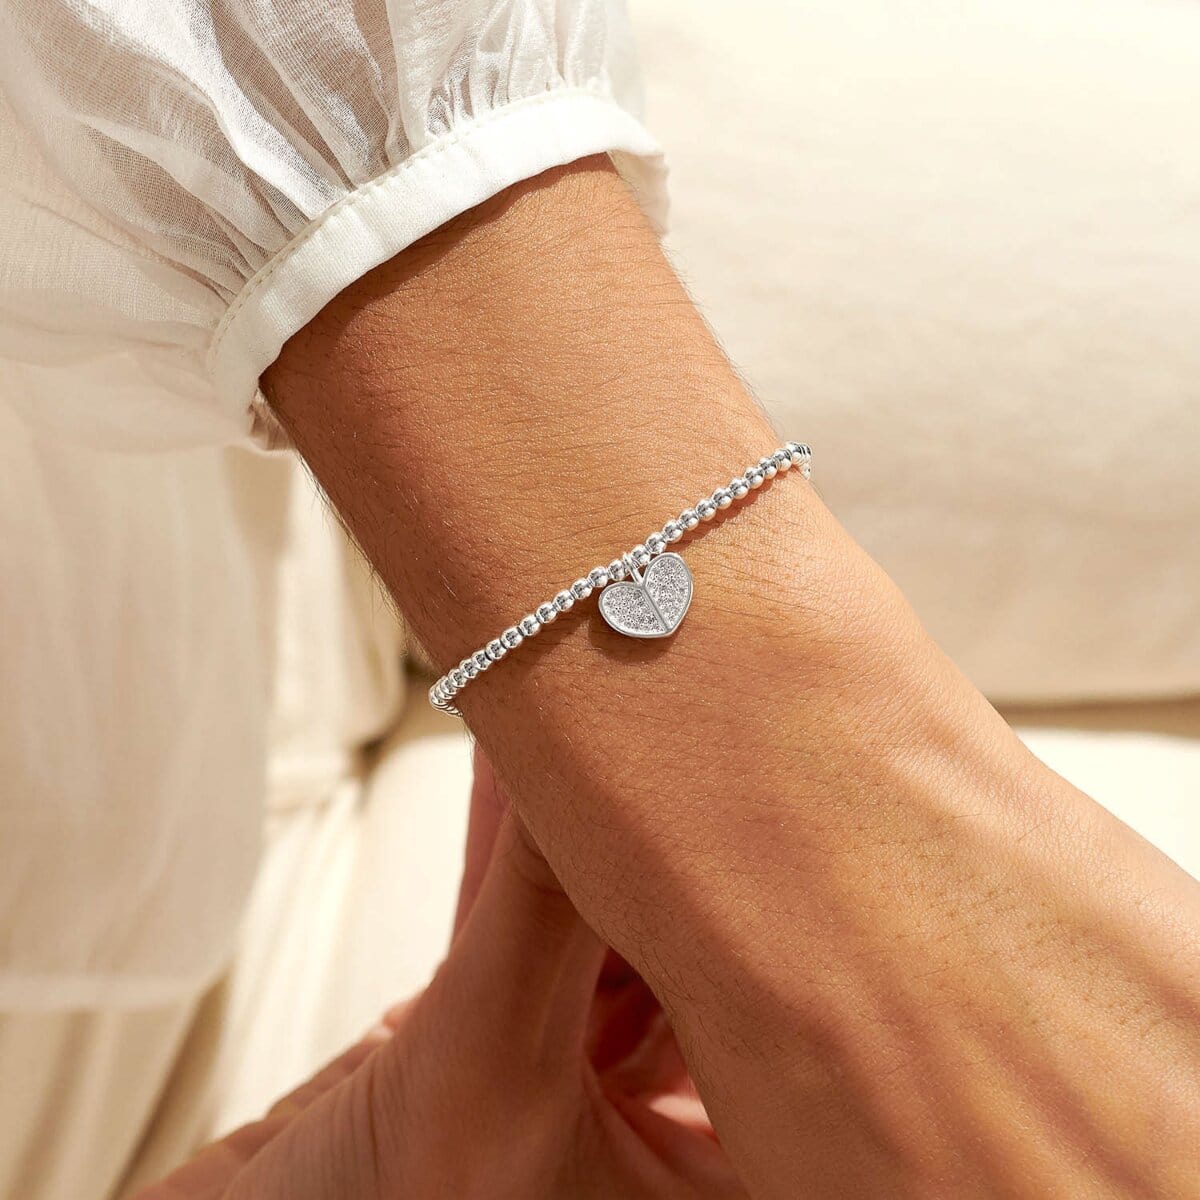 Joma Jewellery Bracelet Joma Jewellery Bracelet - A Little Gone Too Soon But Loved A Lifetime